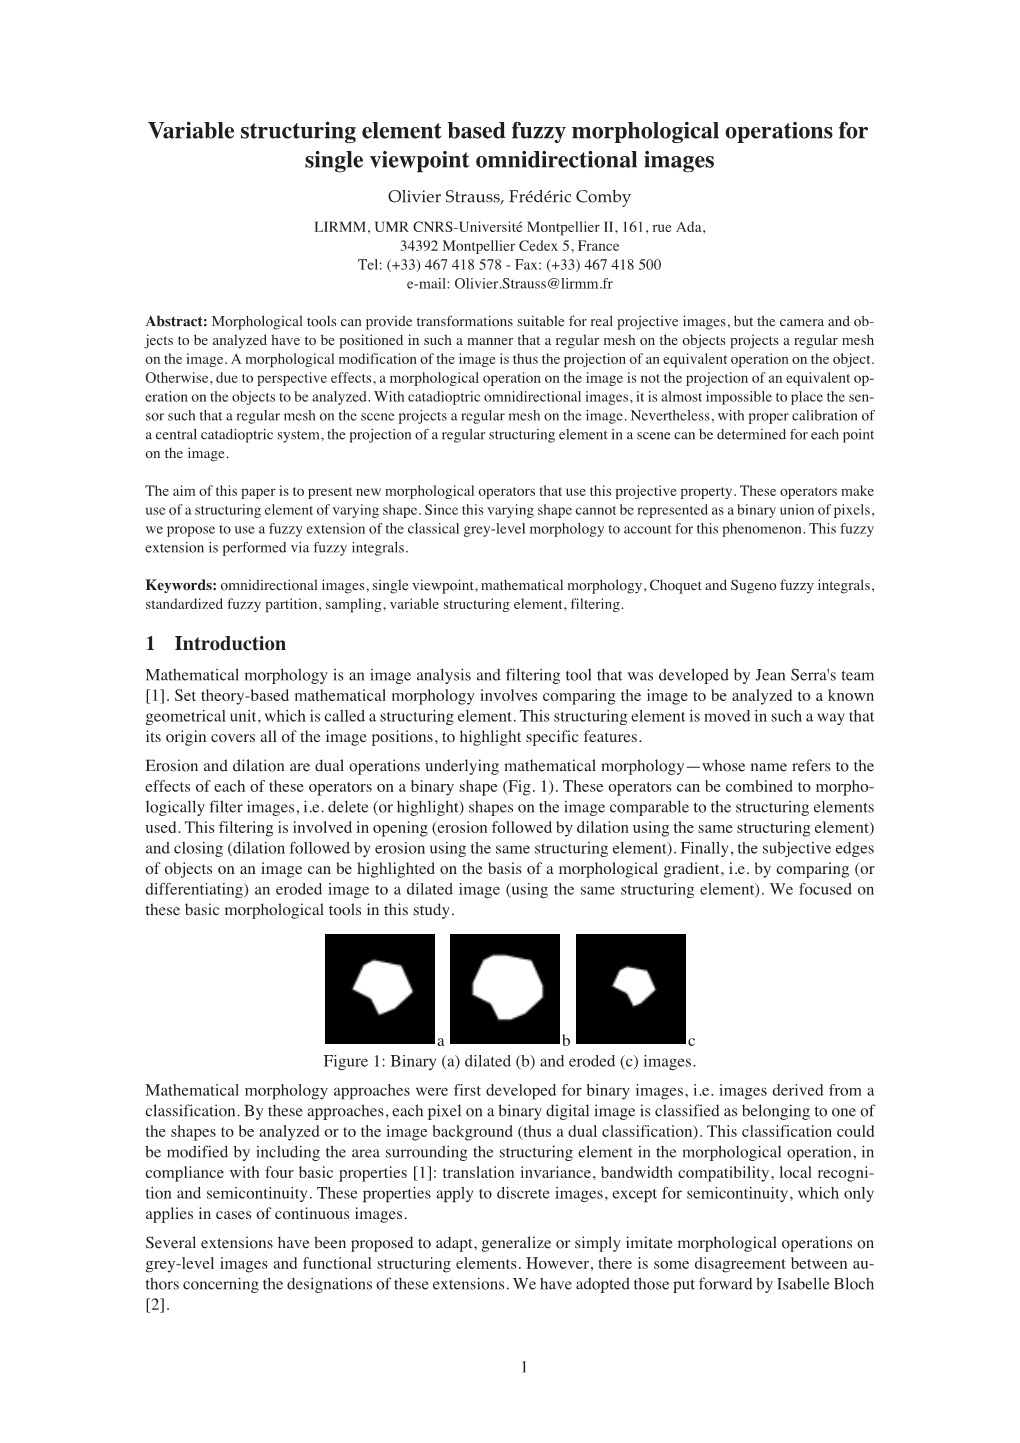 Variable Structuring Element Based Fuzzy Morphological Operations for Single Viewpoint Omnidirectional Images